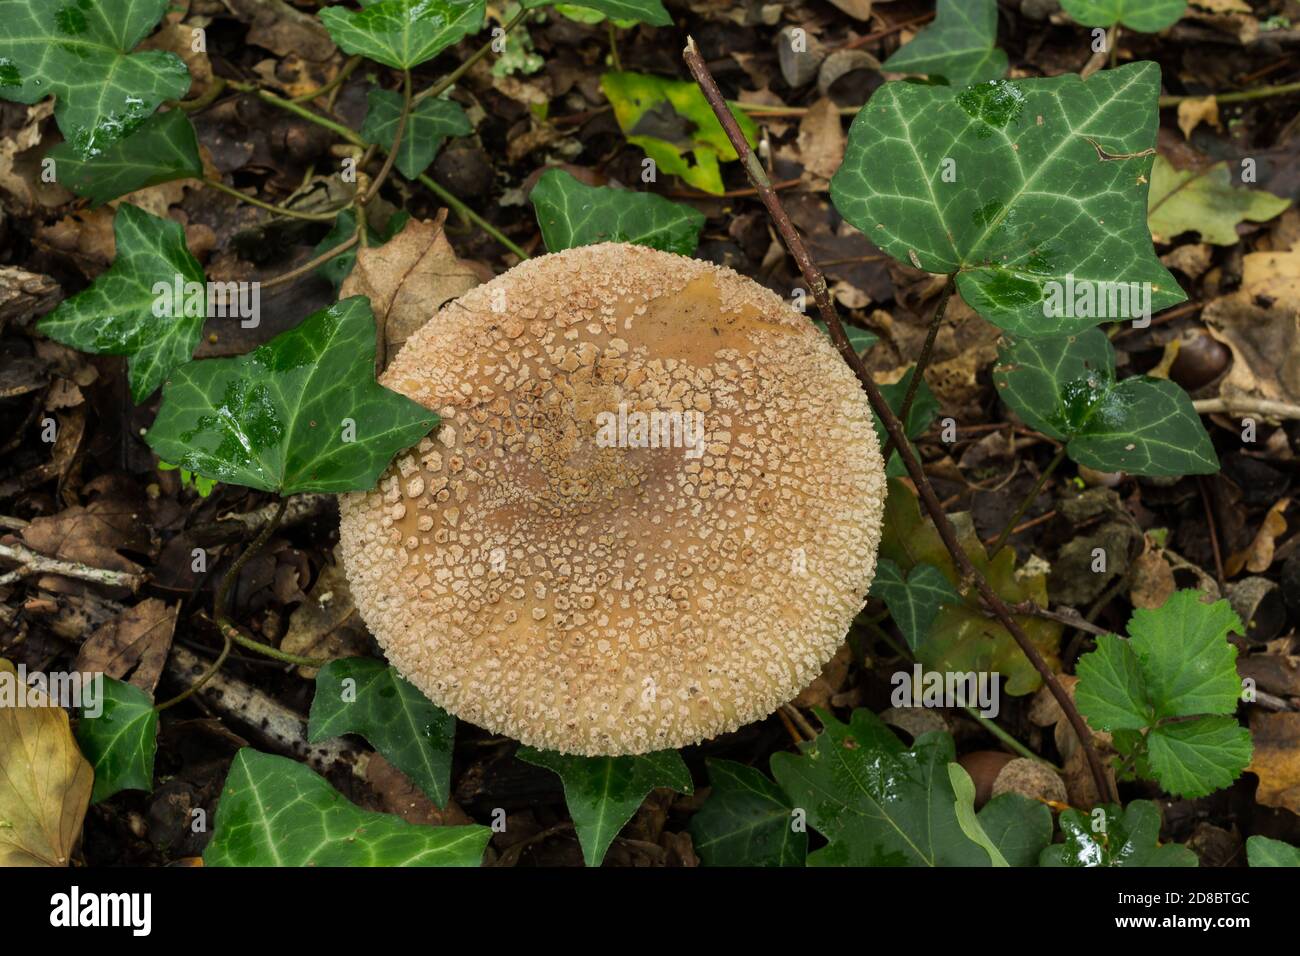 The freckled dapperling found in hardwood woodland in October France. Stock Photo